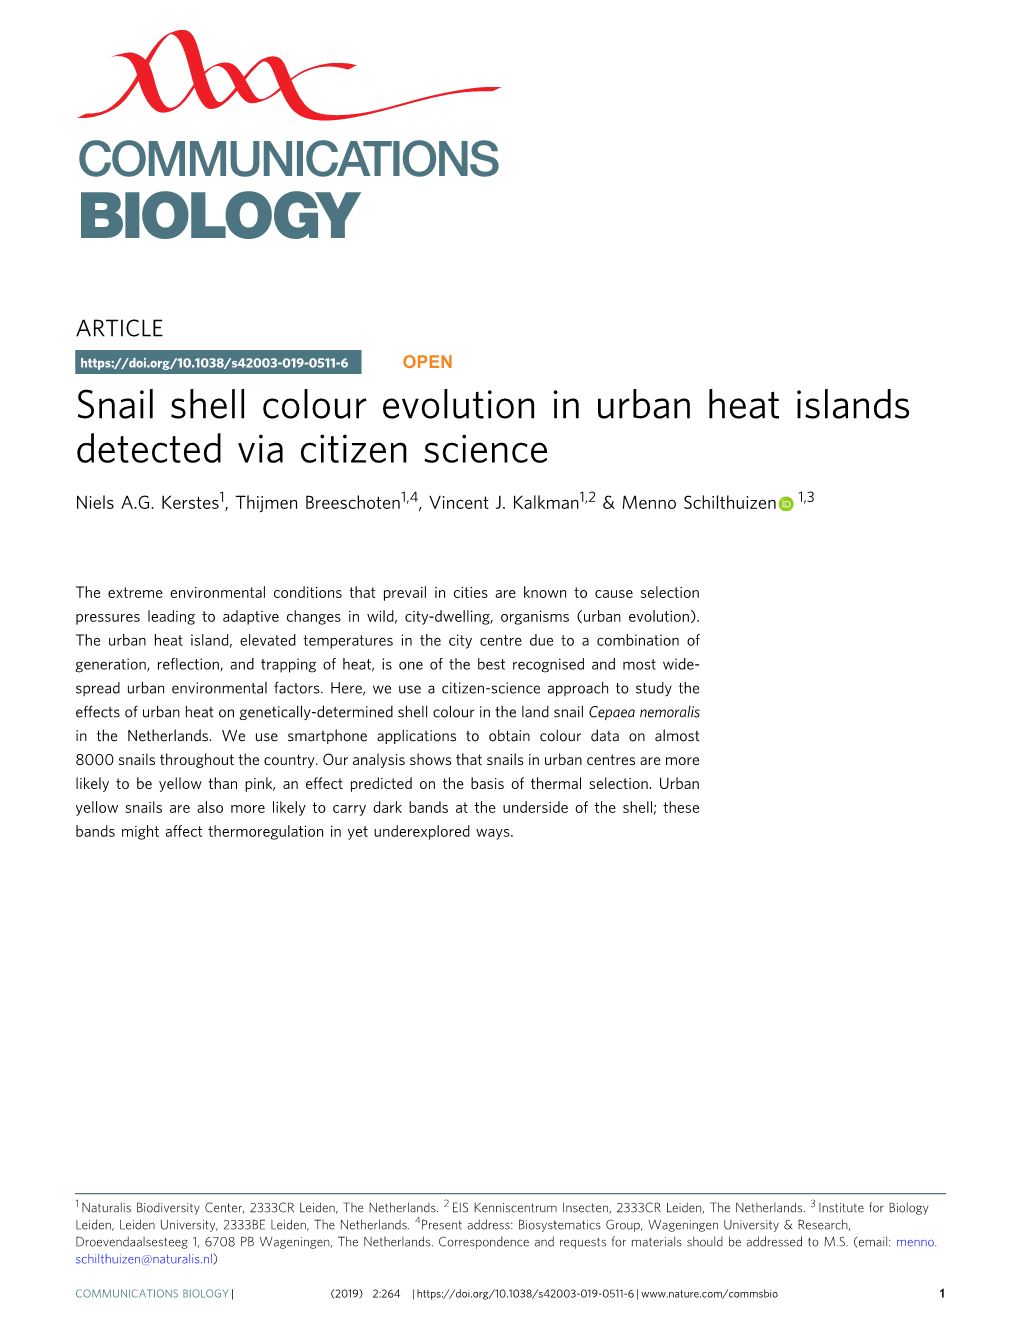 Snail Shell Colour Evolution in Urban Heat Islands Detected Via Citizen Science